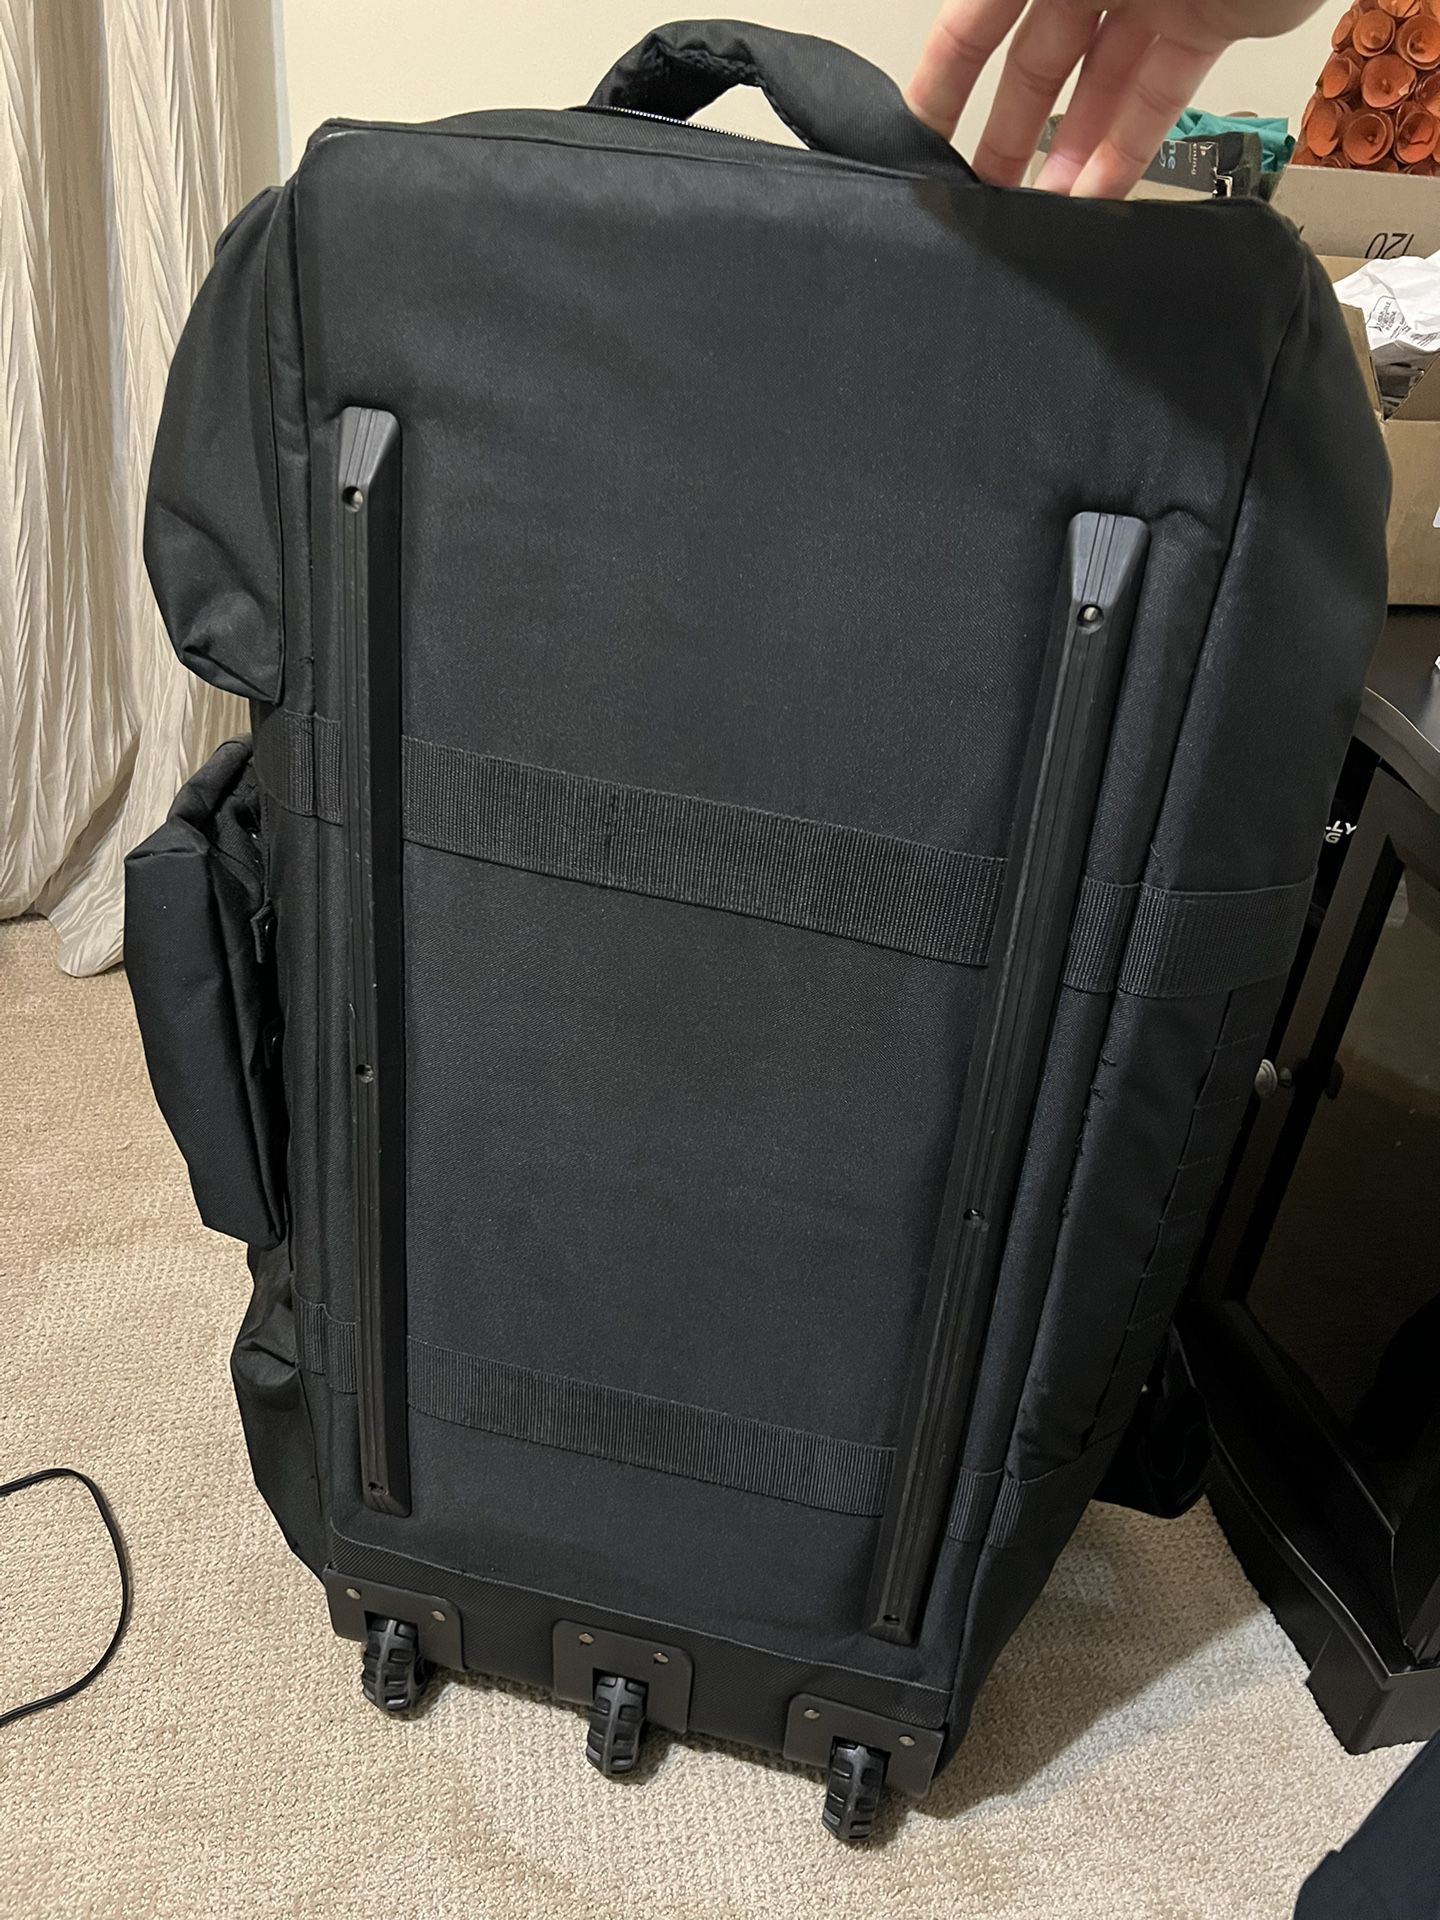 Large Rolling Military Bag